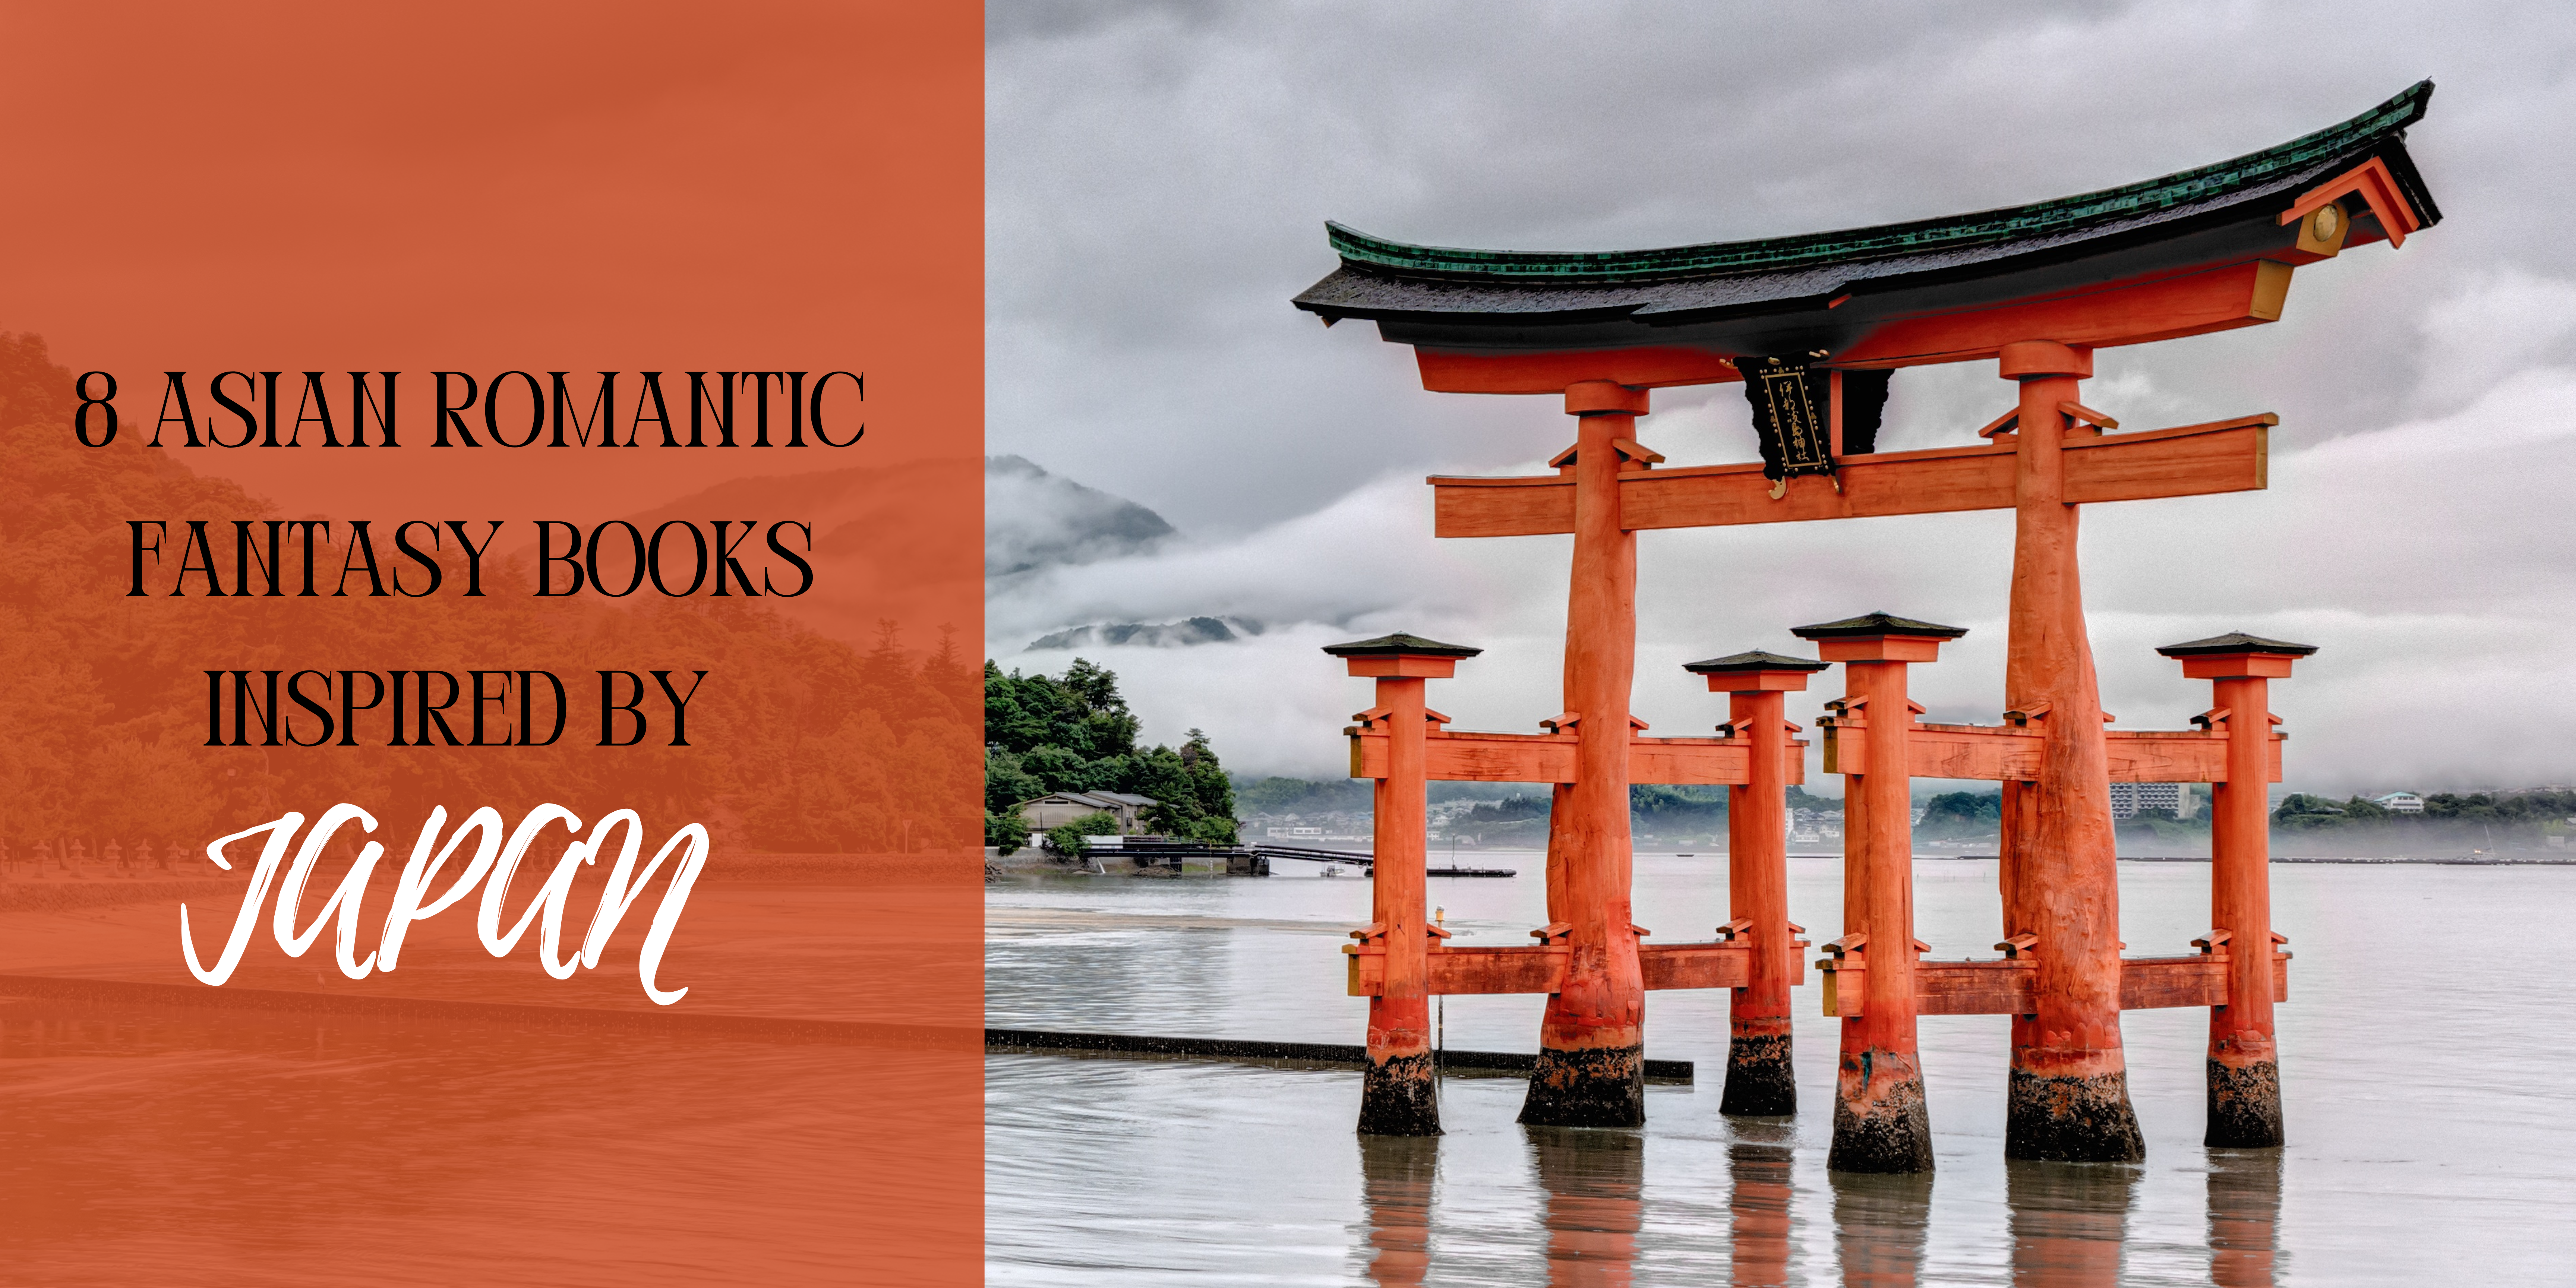 8 Asian Romantic Fantasy Books Inspired by Japan